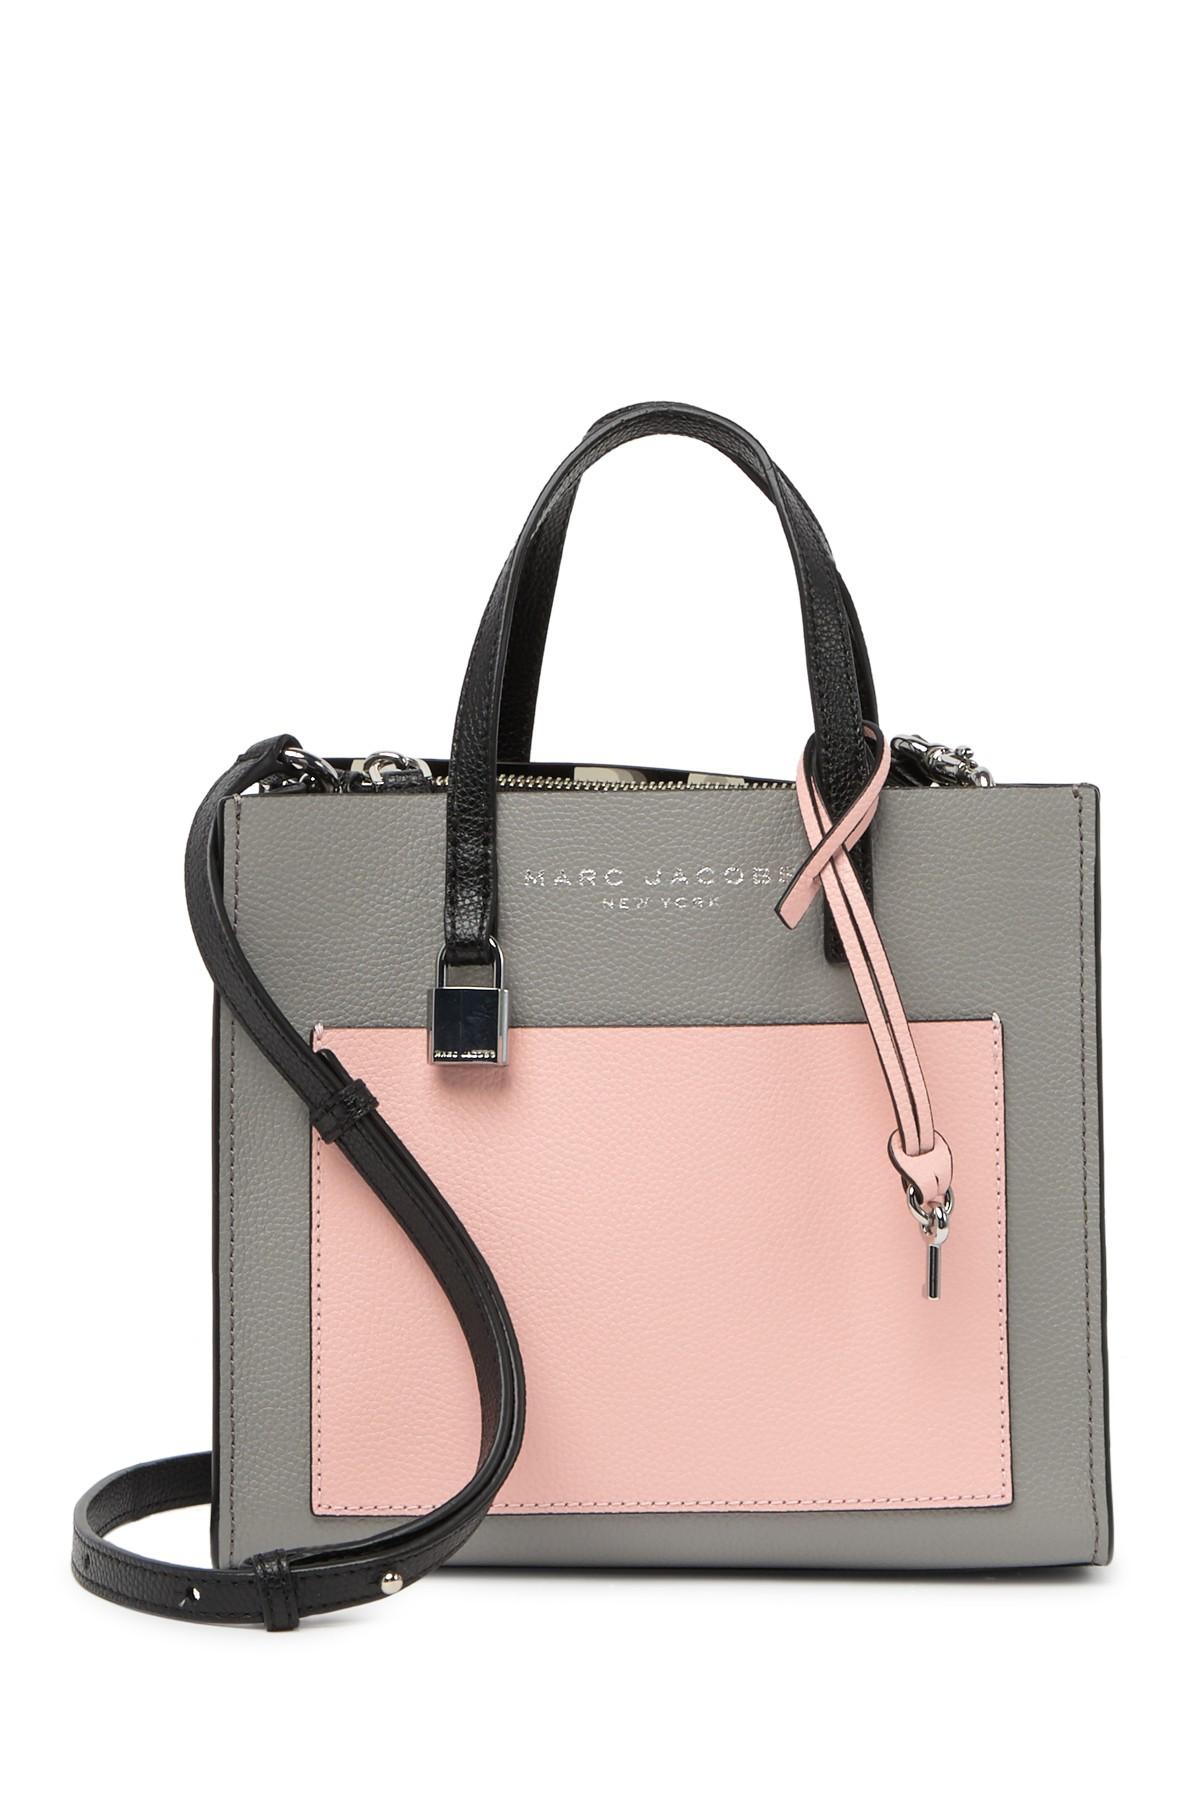 Marc Jacobs Mini Grind Colorblock Leather Tote Bag in Black